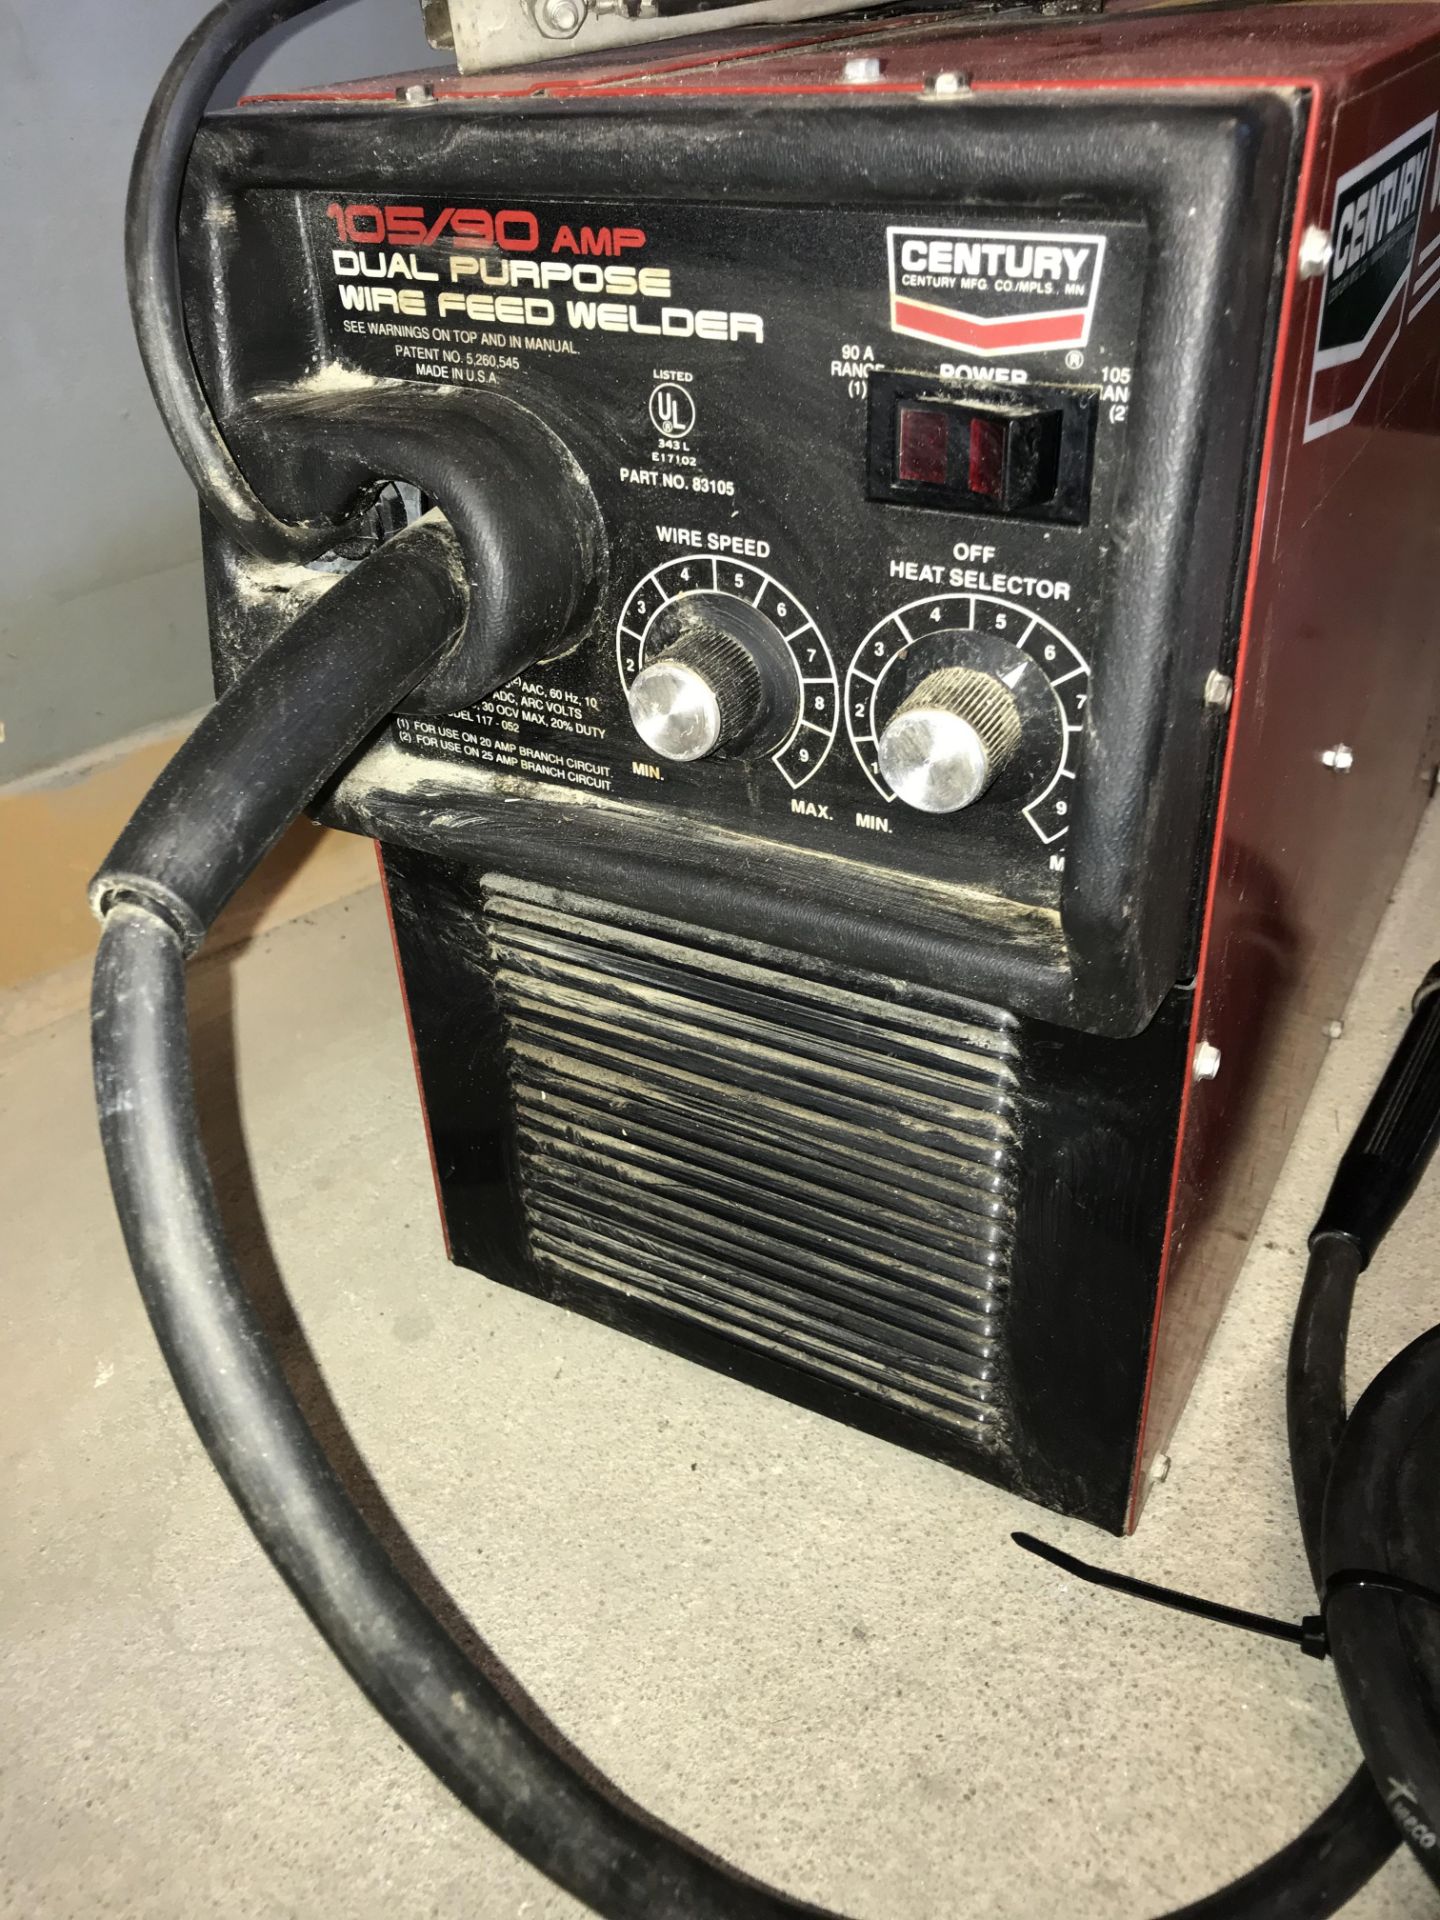 Lincoln Electric Century 105/90 Amp WireFeed Welder - Image 3 of 3